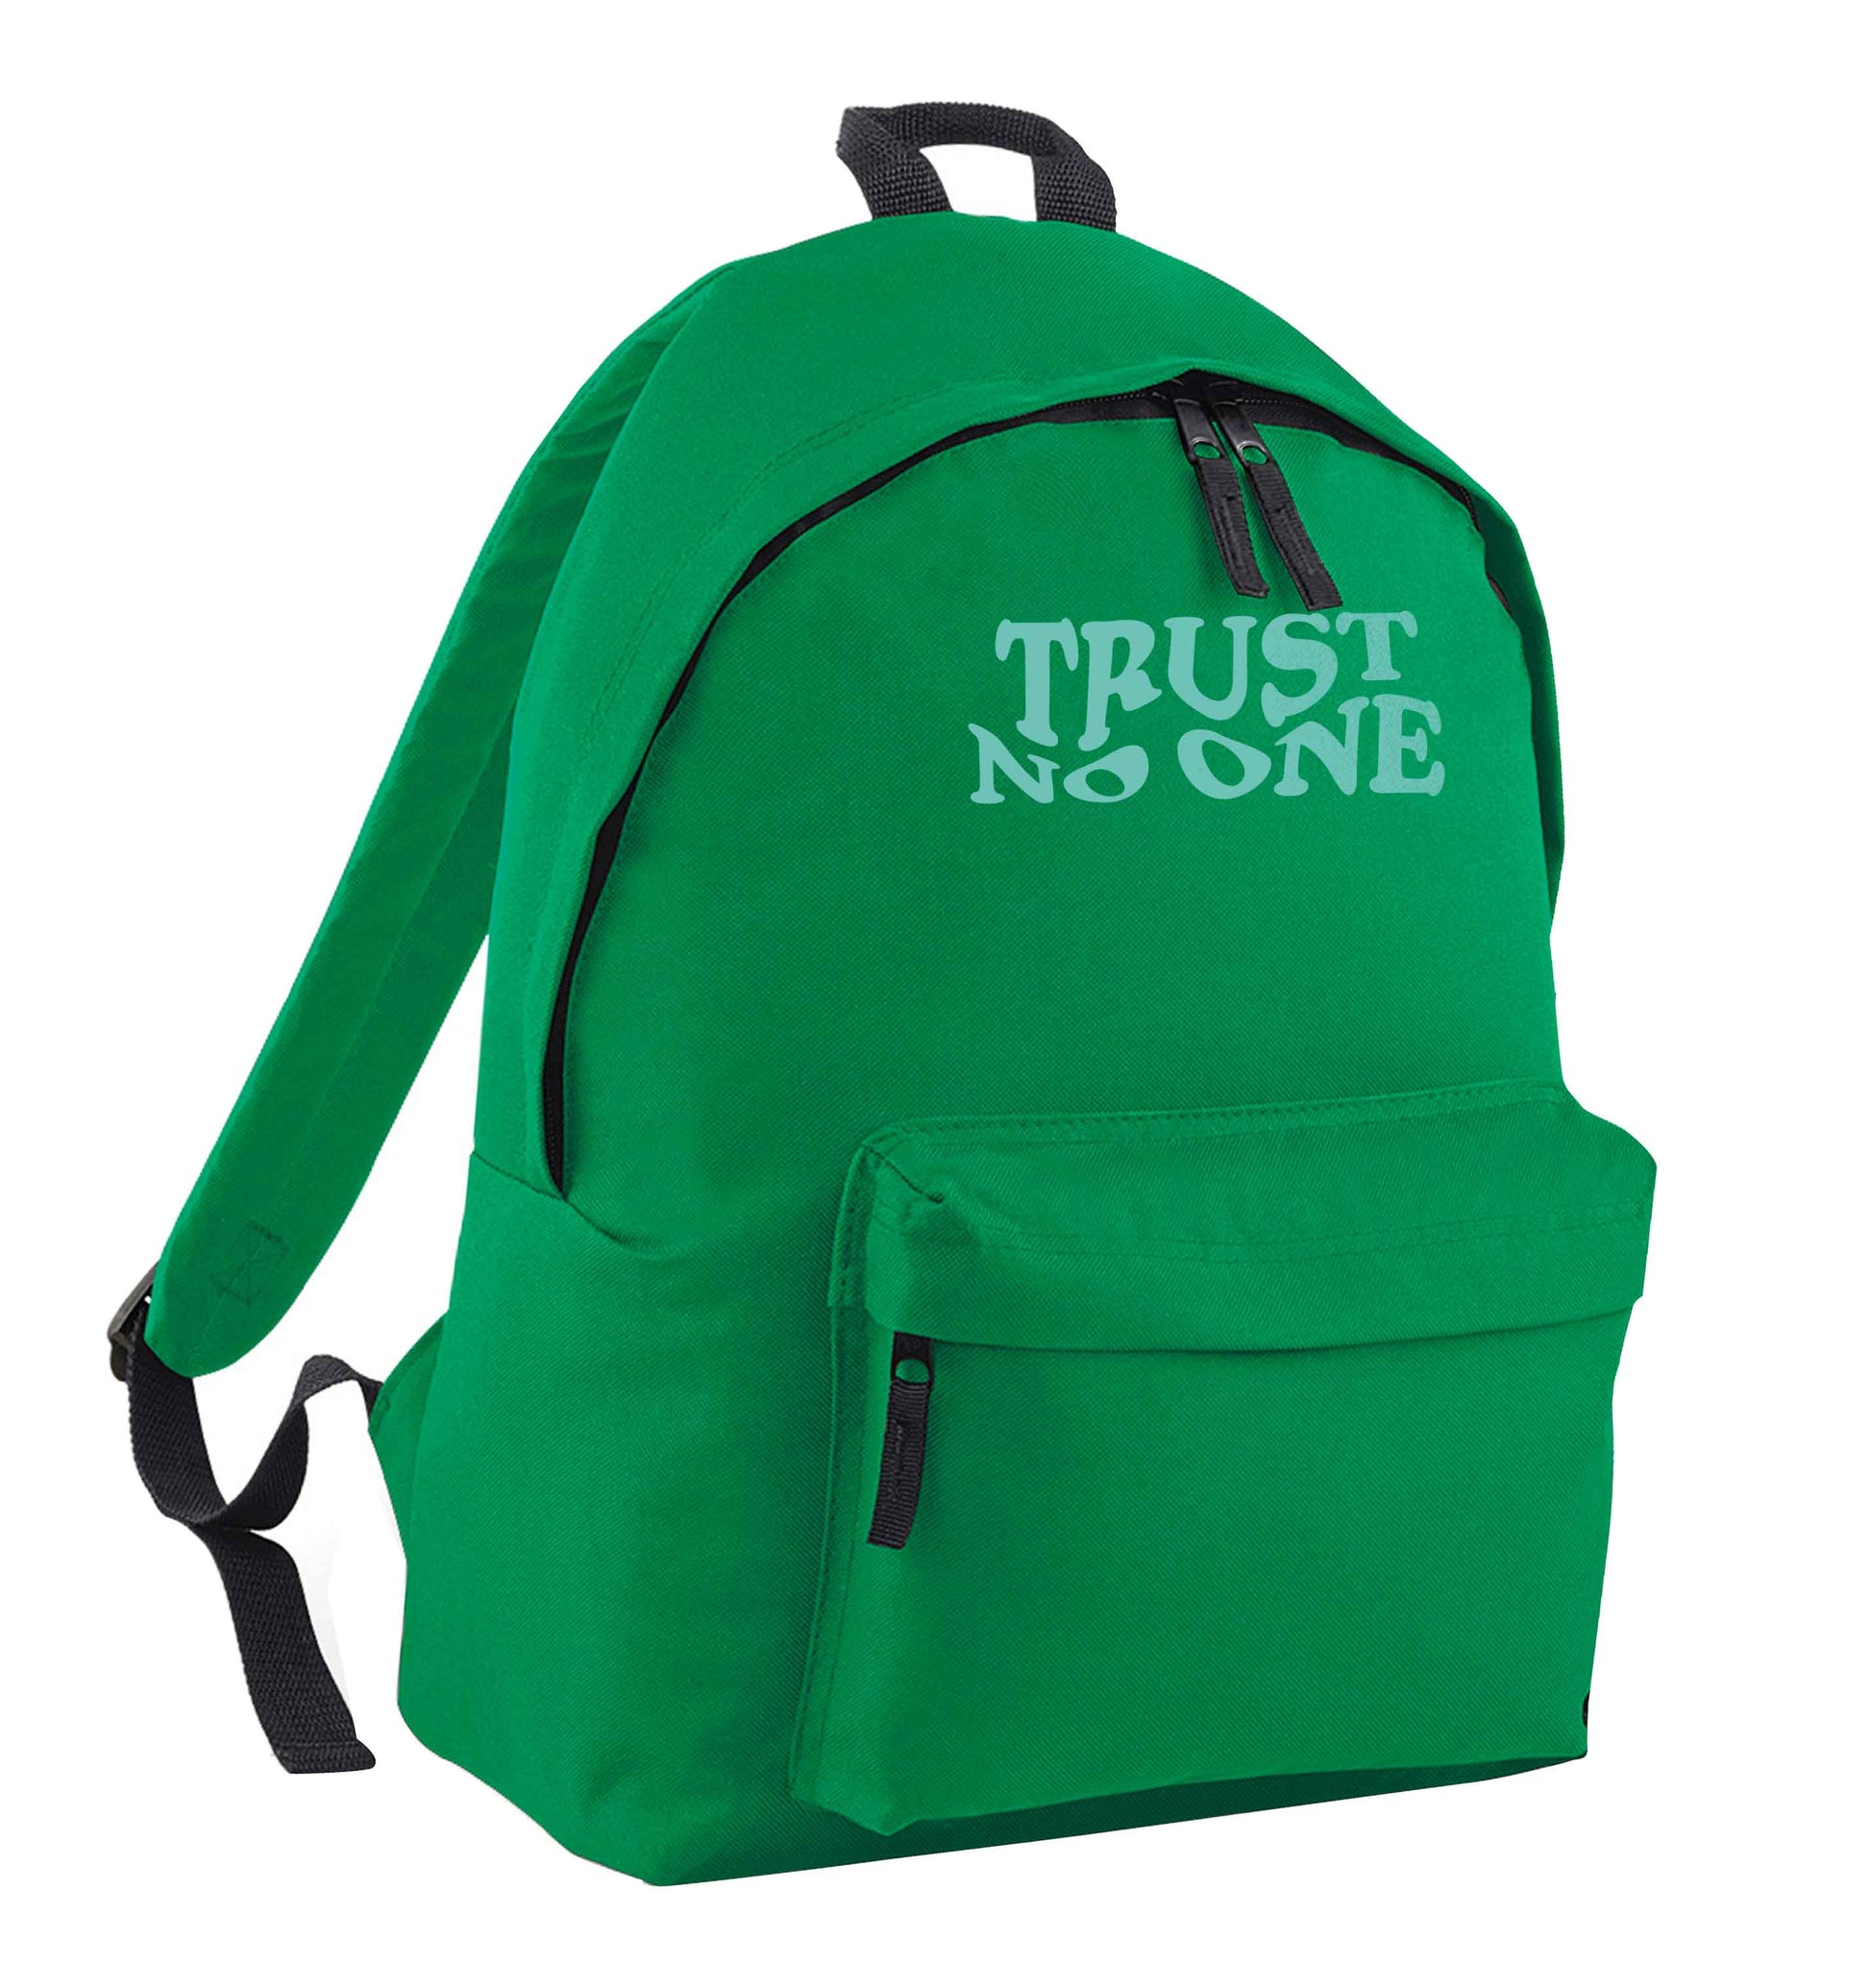 Trust no one green adults backpack